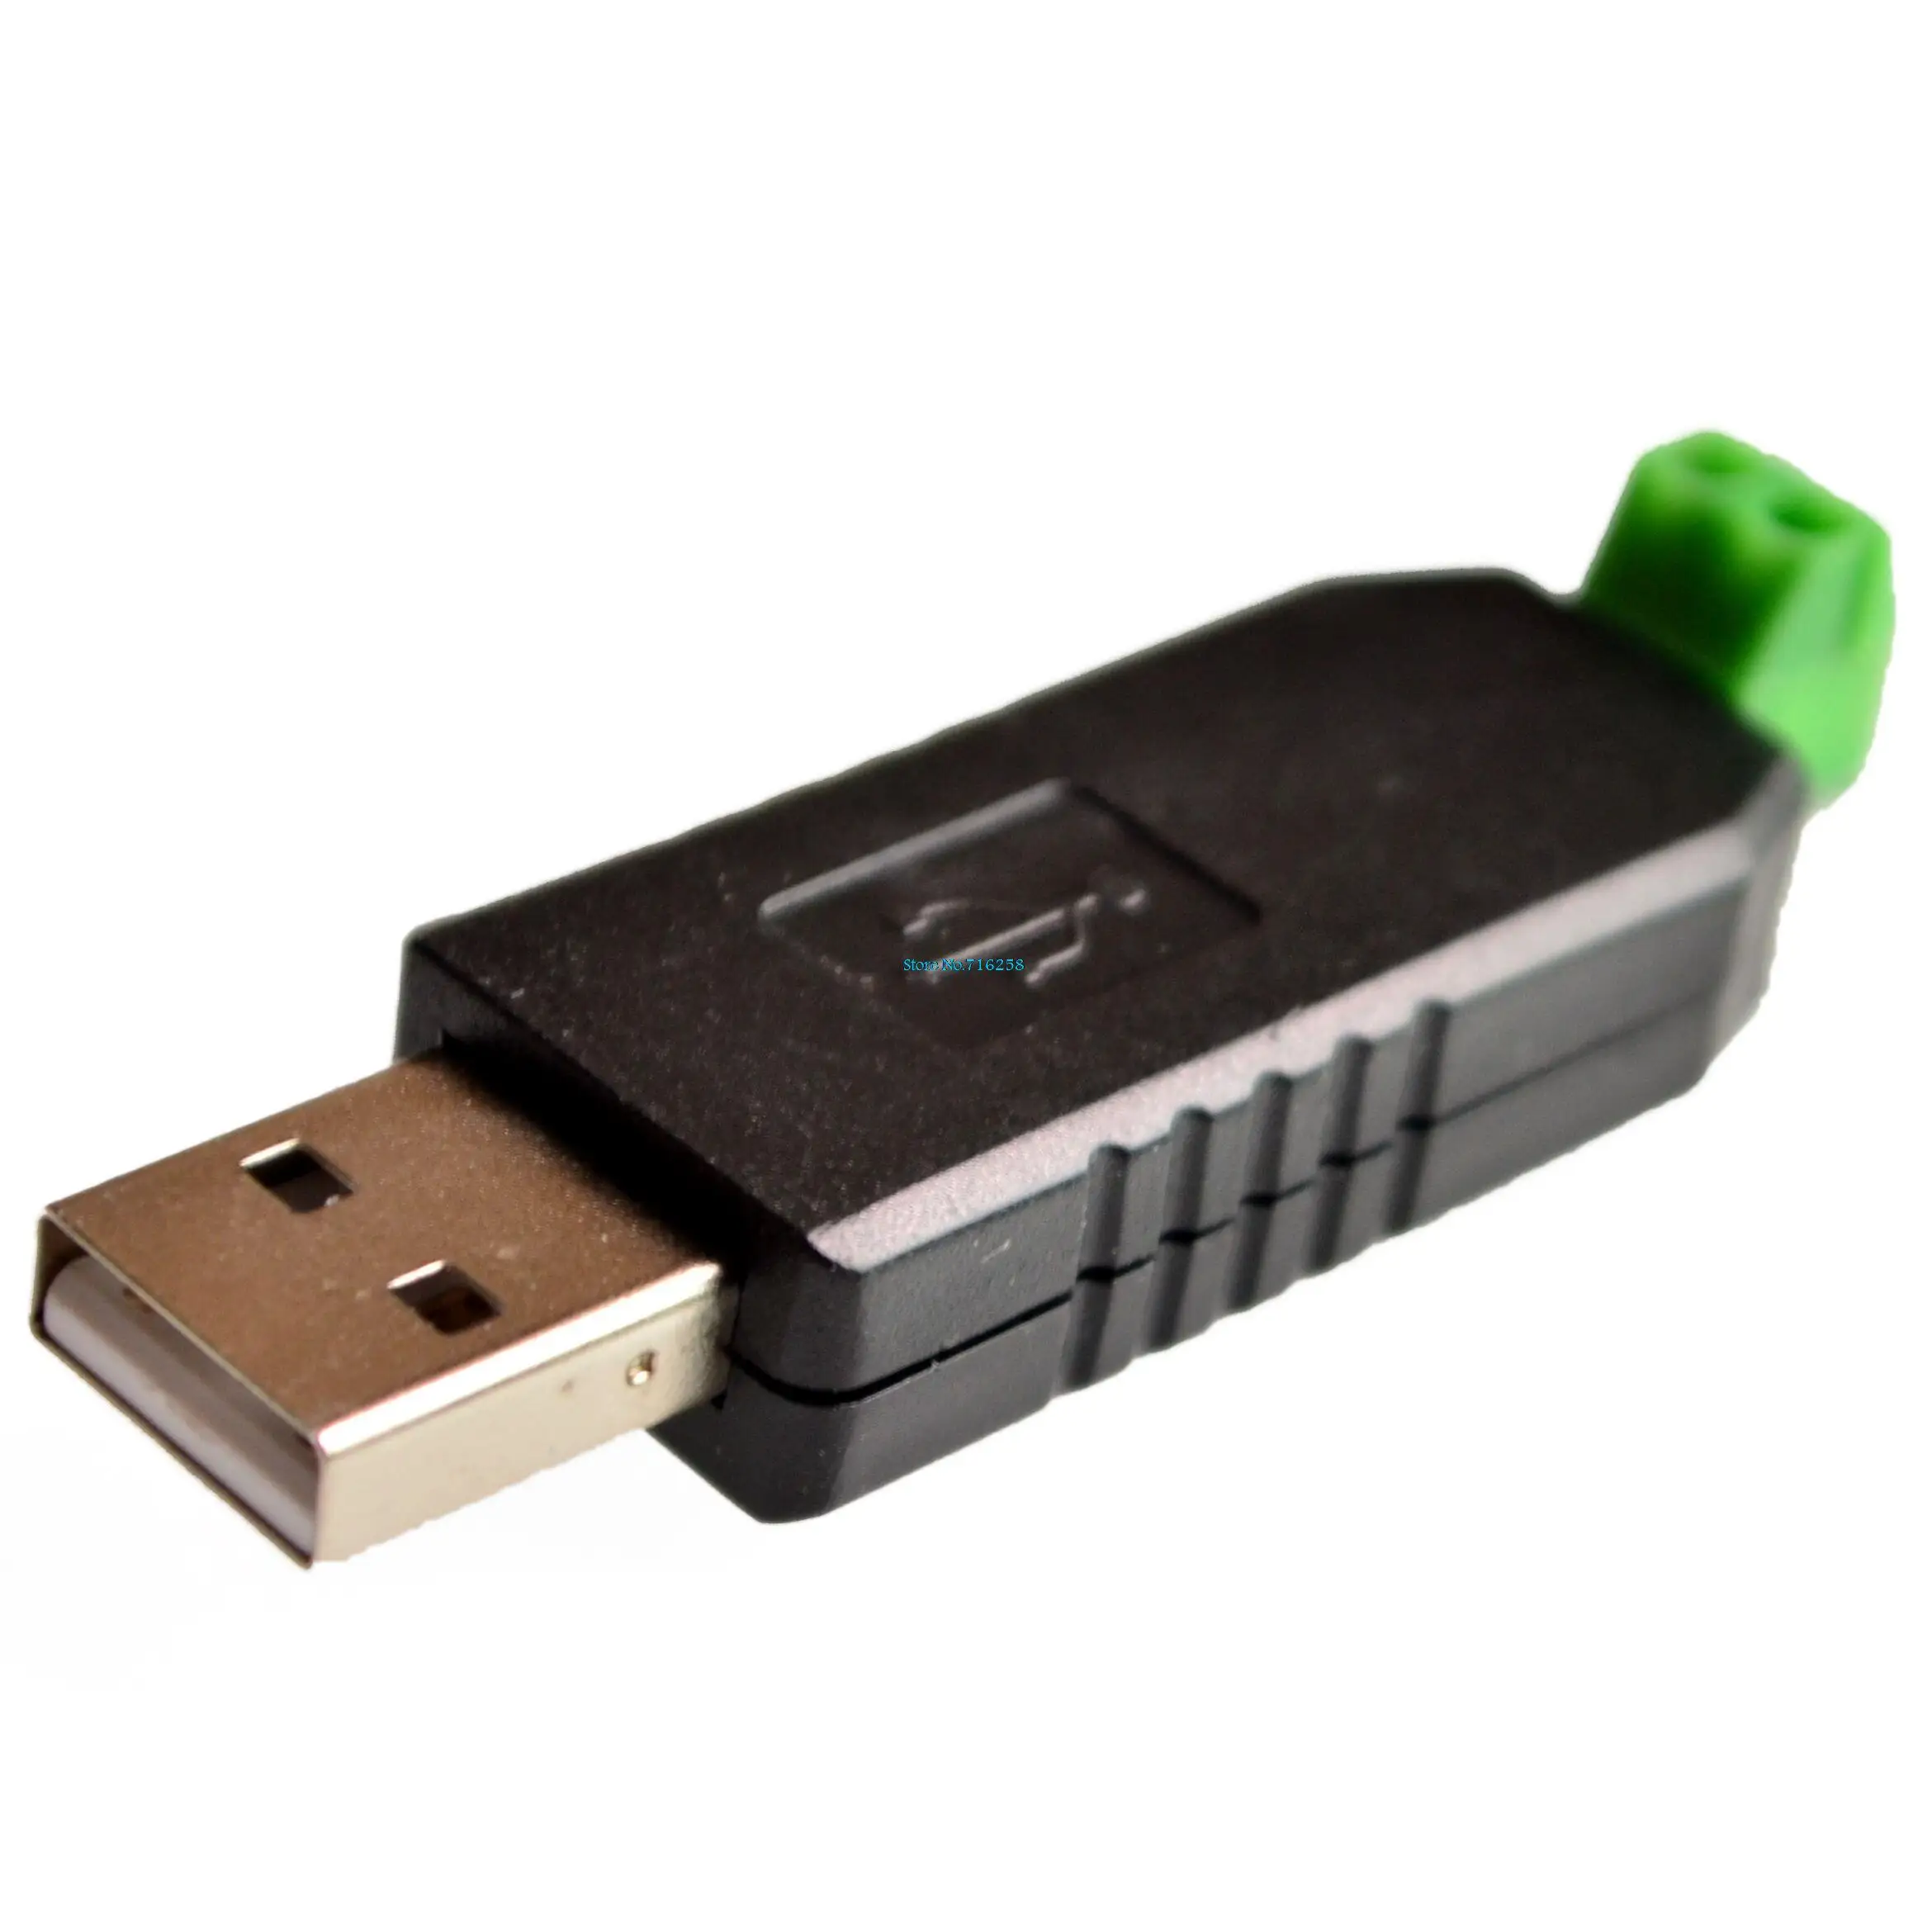 

1PCS USB to RS485 485 Converter Adapter Support Win7 XP Vista Linux Mac OS WinCE5.0 RS-485